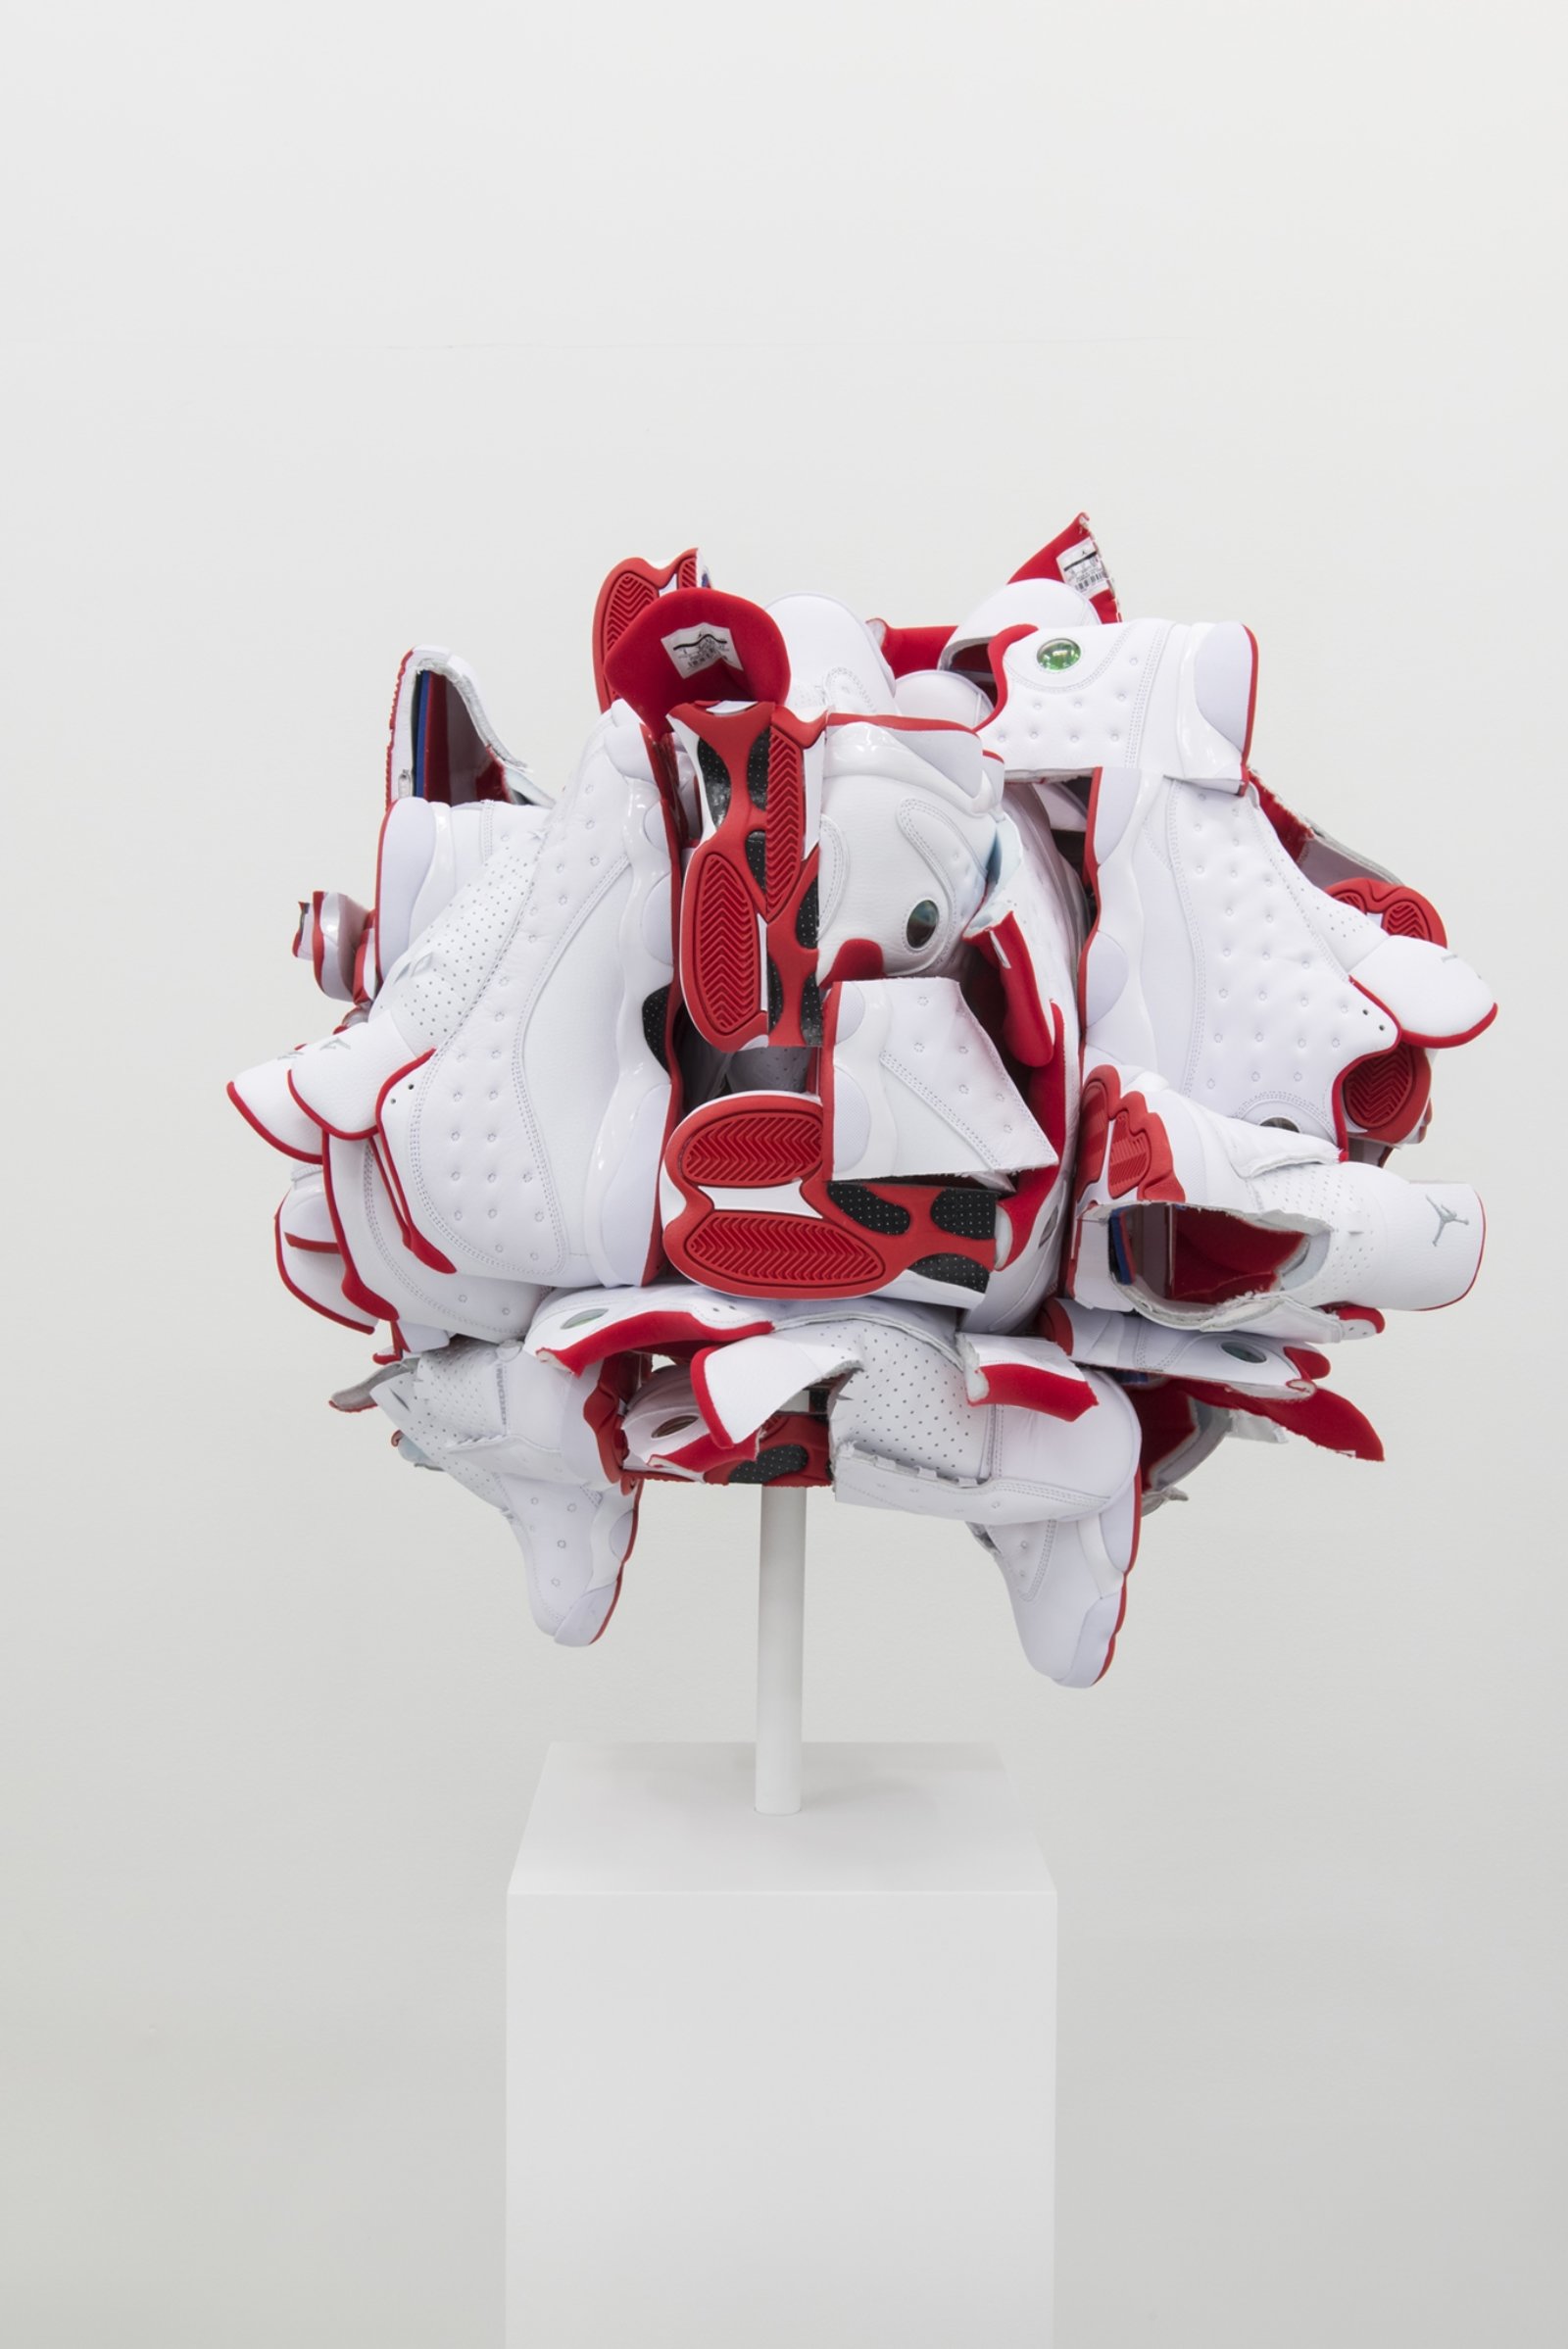 Brian Jungen, Supersize the Light in All Directions 2, 2018, nike air jordans, 29 x 29 x 29 in. (74 x 74 x 74 cm)